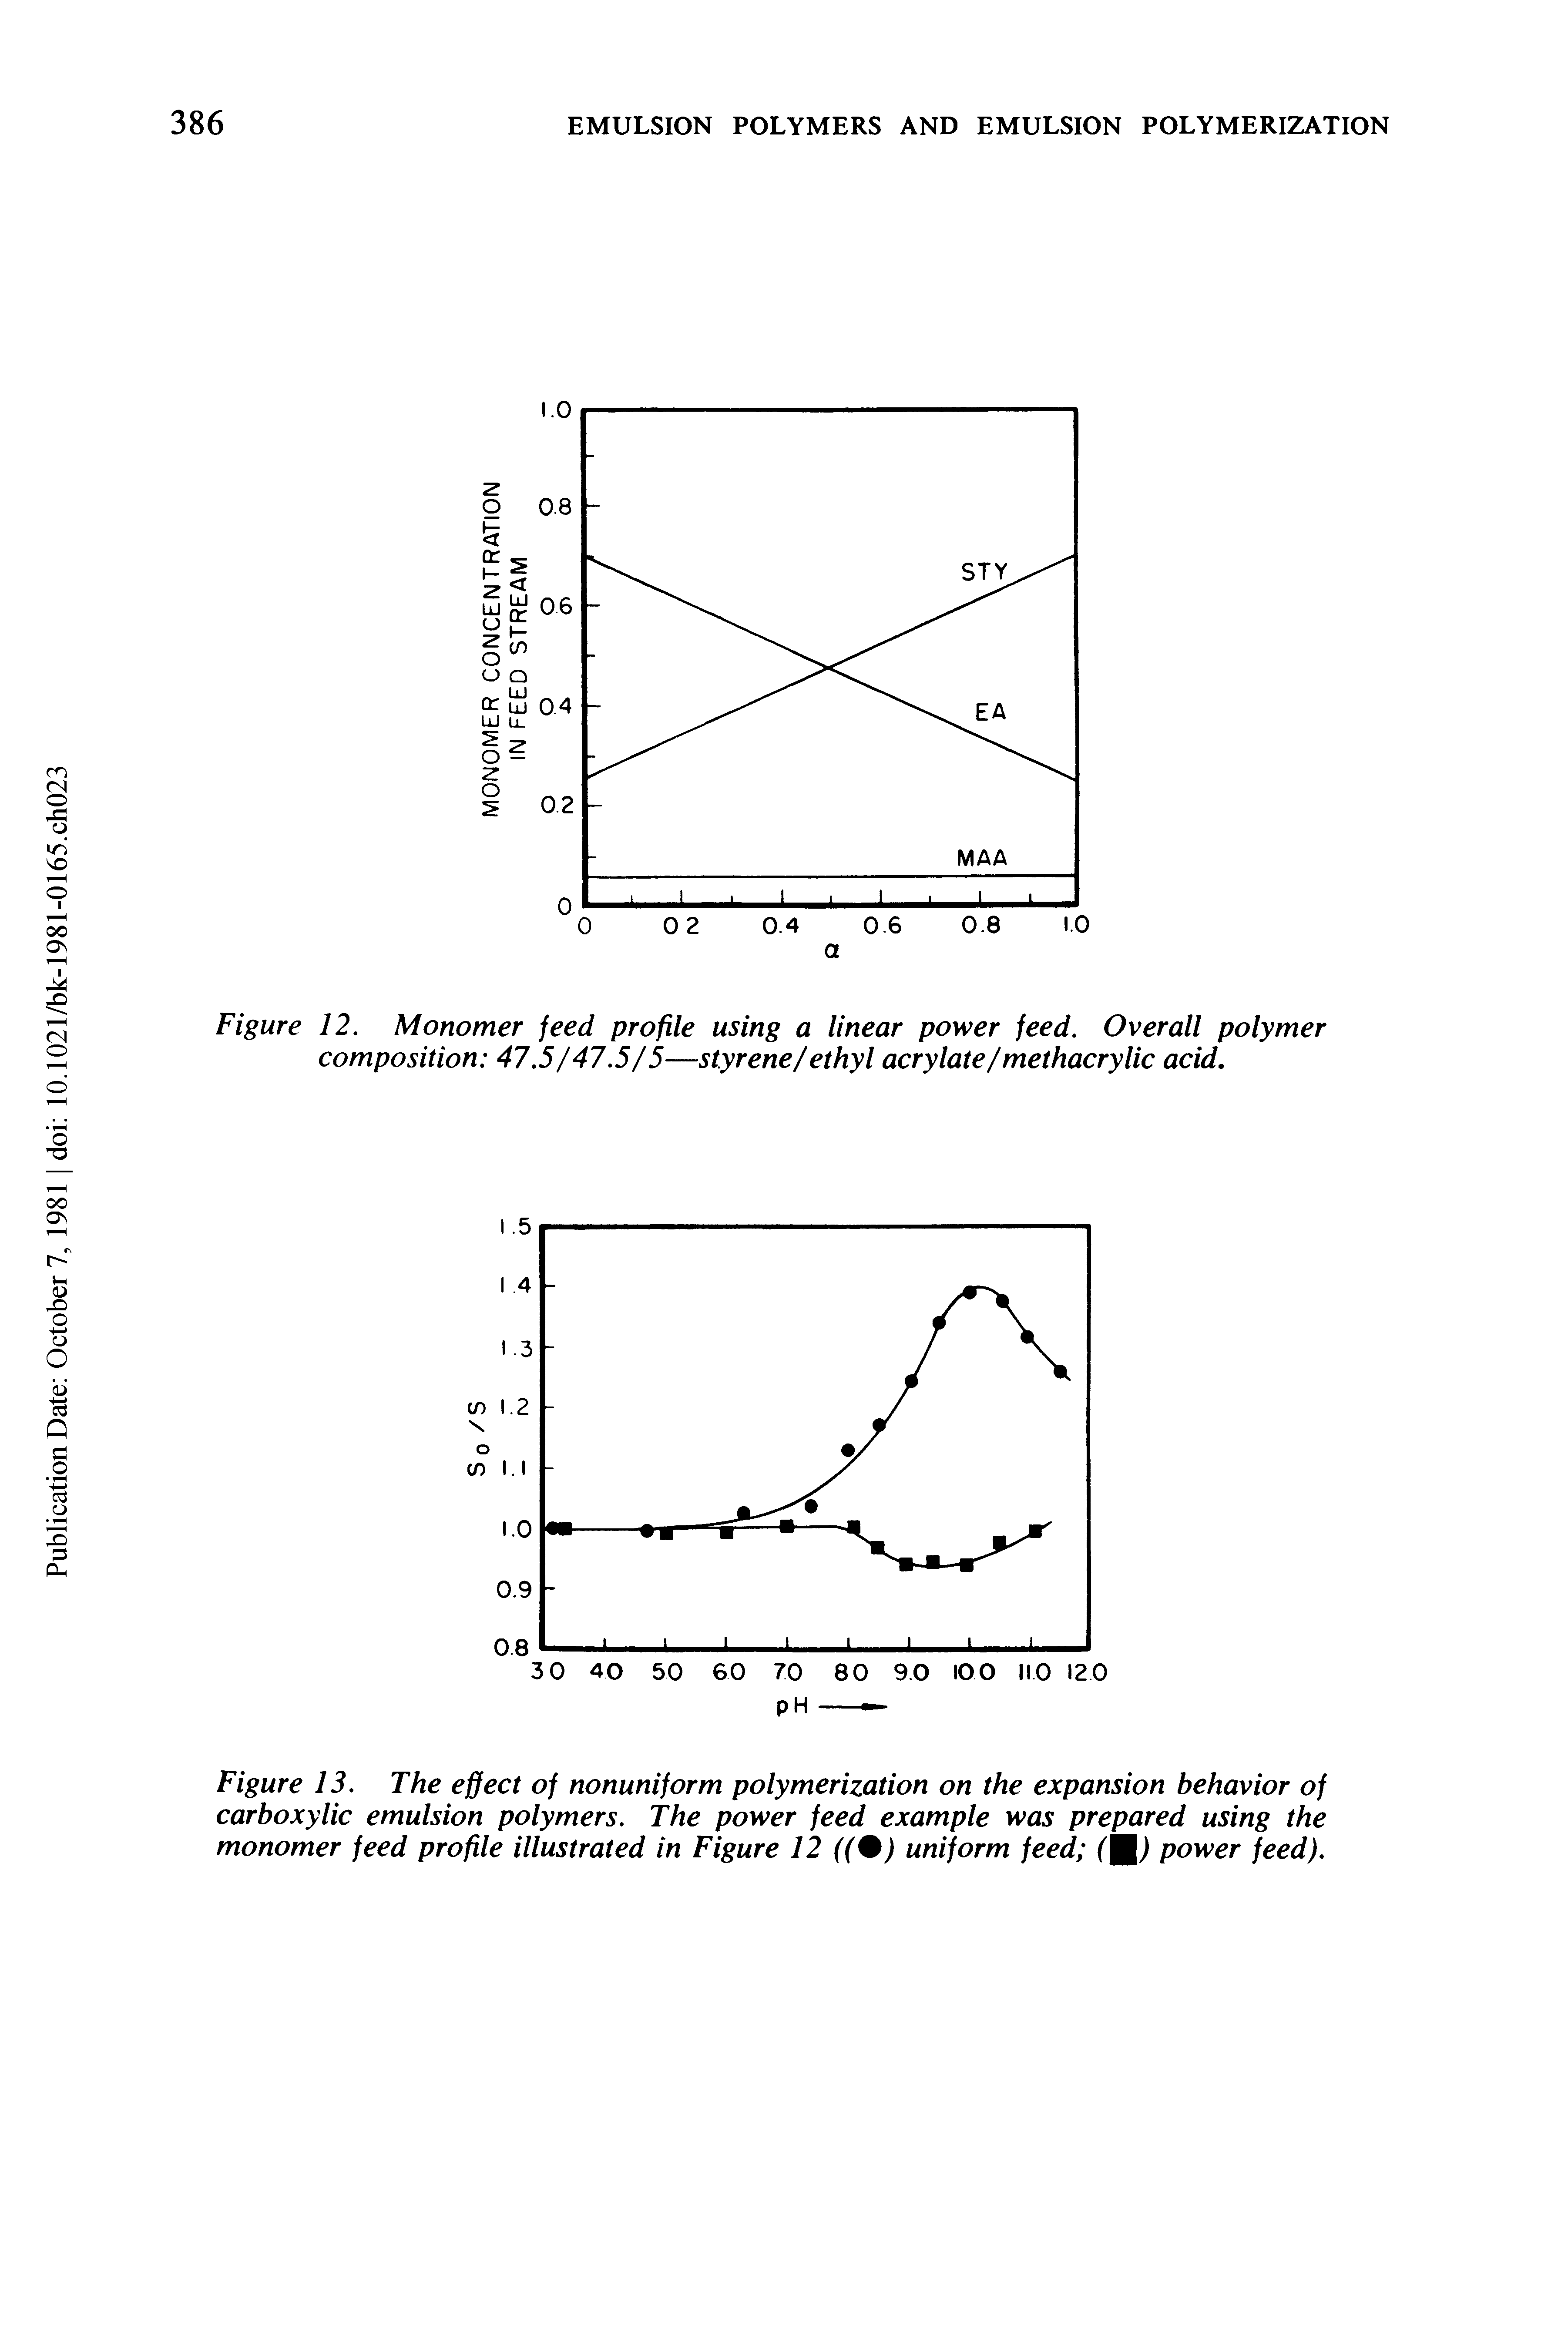 Figure 13. The effect of nonuniform polymerization on the expansion behavior of carboxylic emulsion polymers. The power feed example was prepared using the monomer feed profile illustrated in Figure 12 ((%) uniform feed power feed).